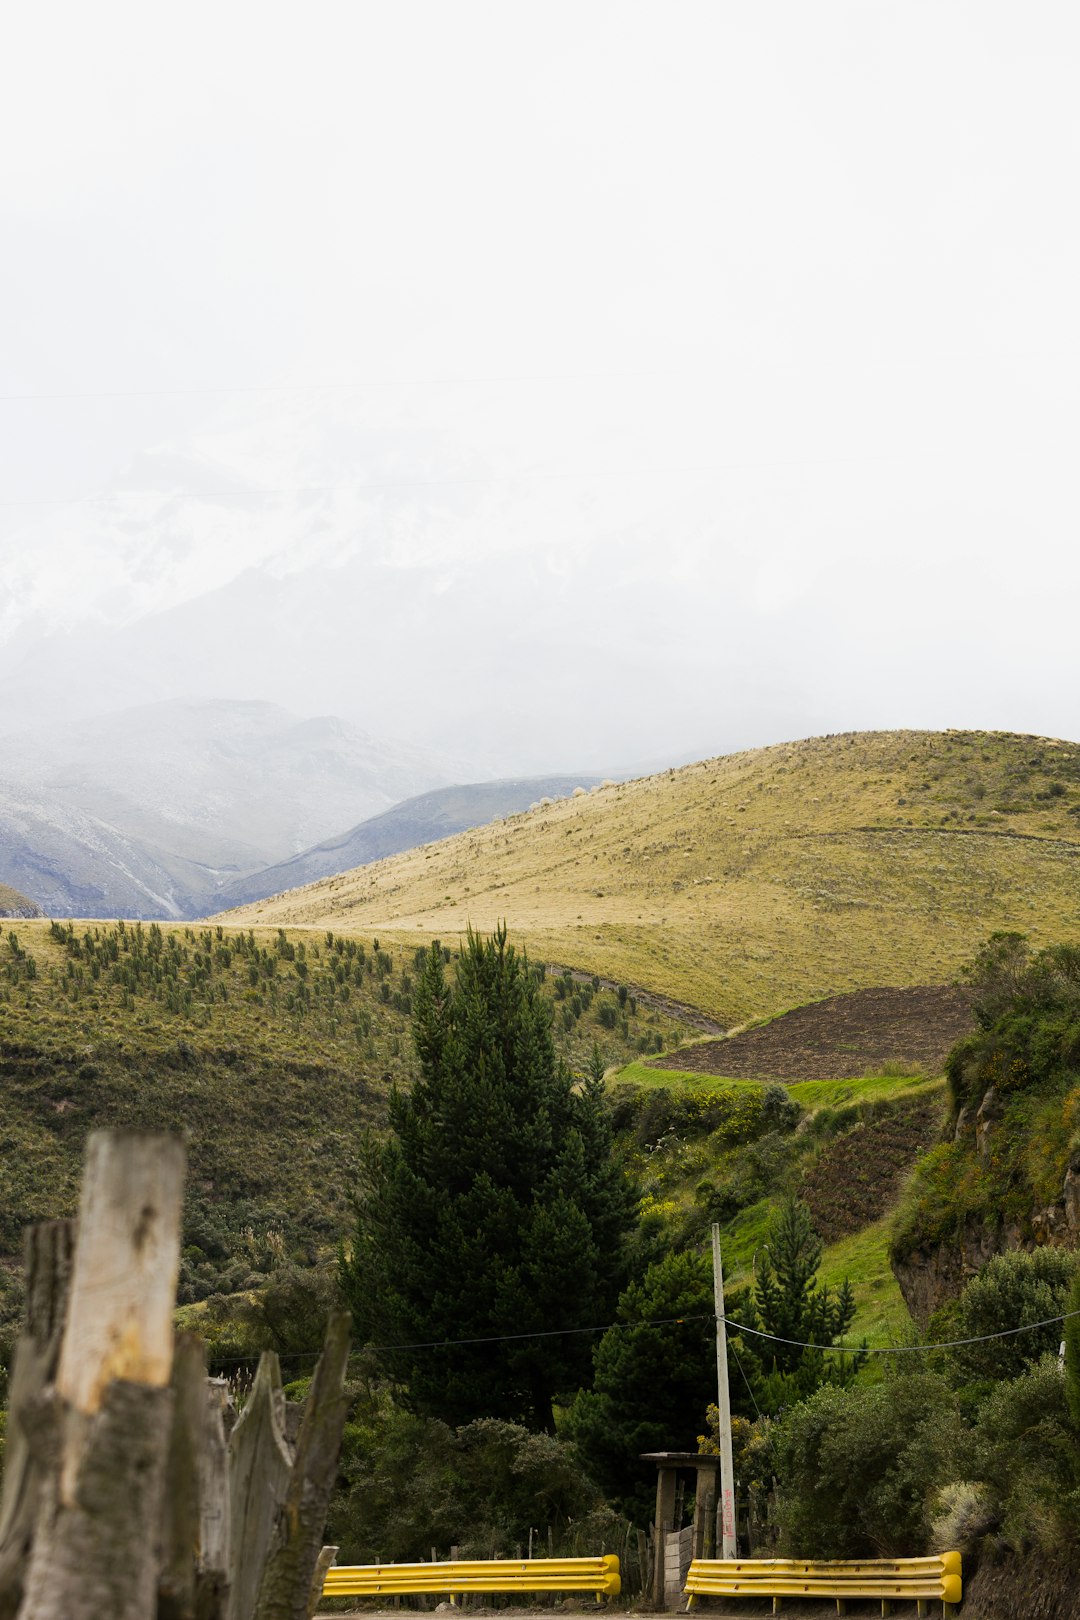 travelers stories about Hill in Chimborazo, Ecuador